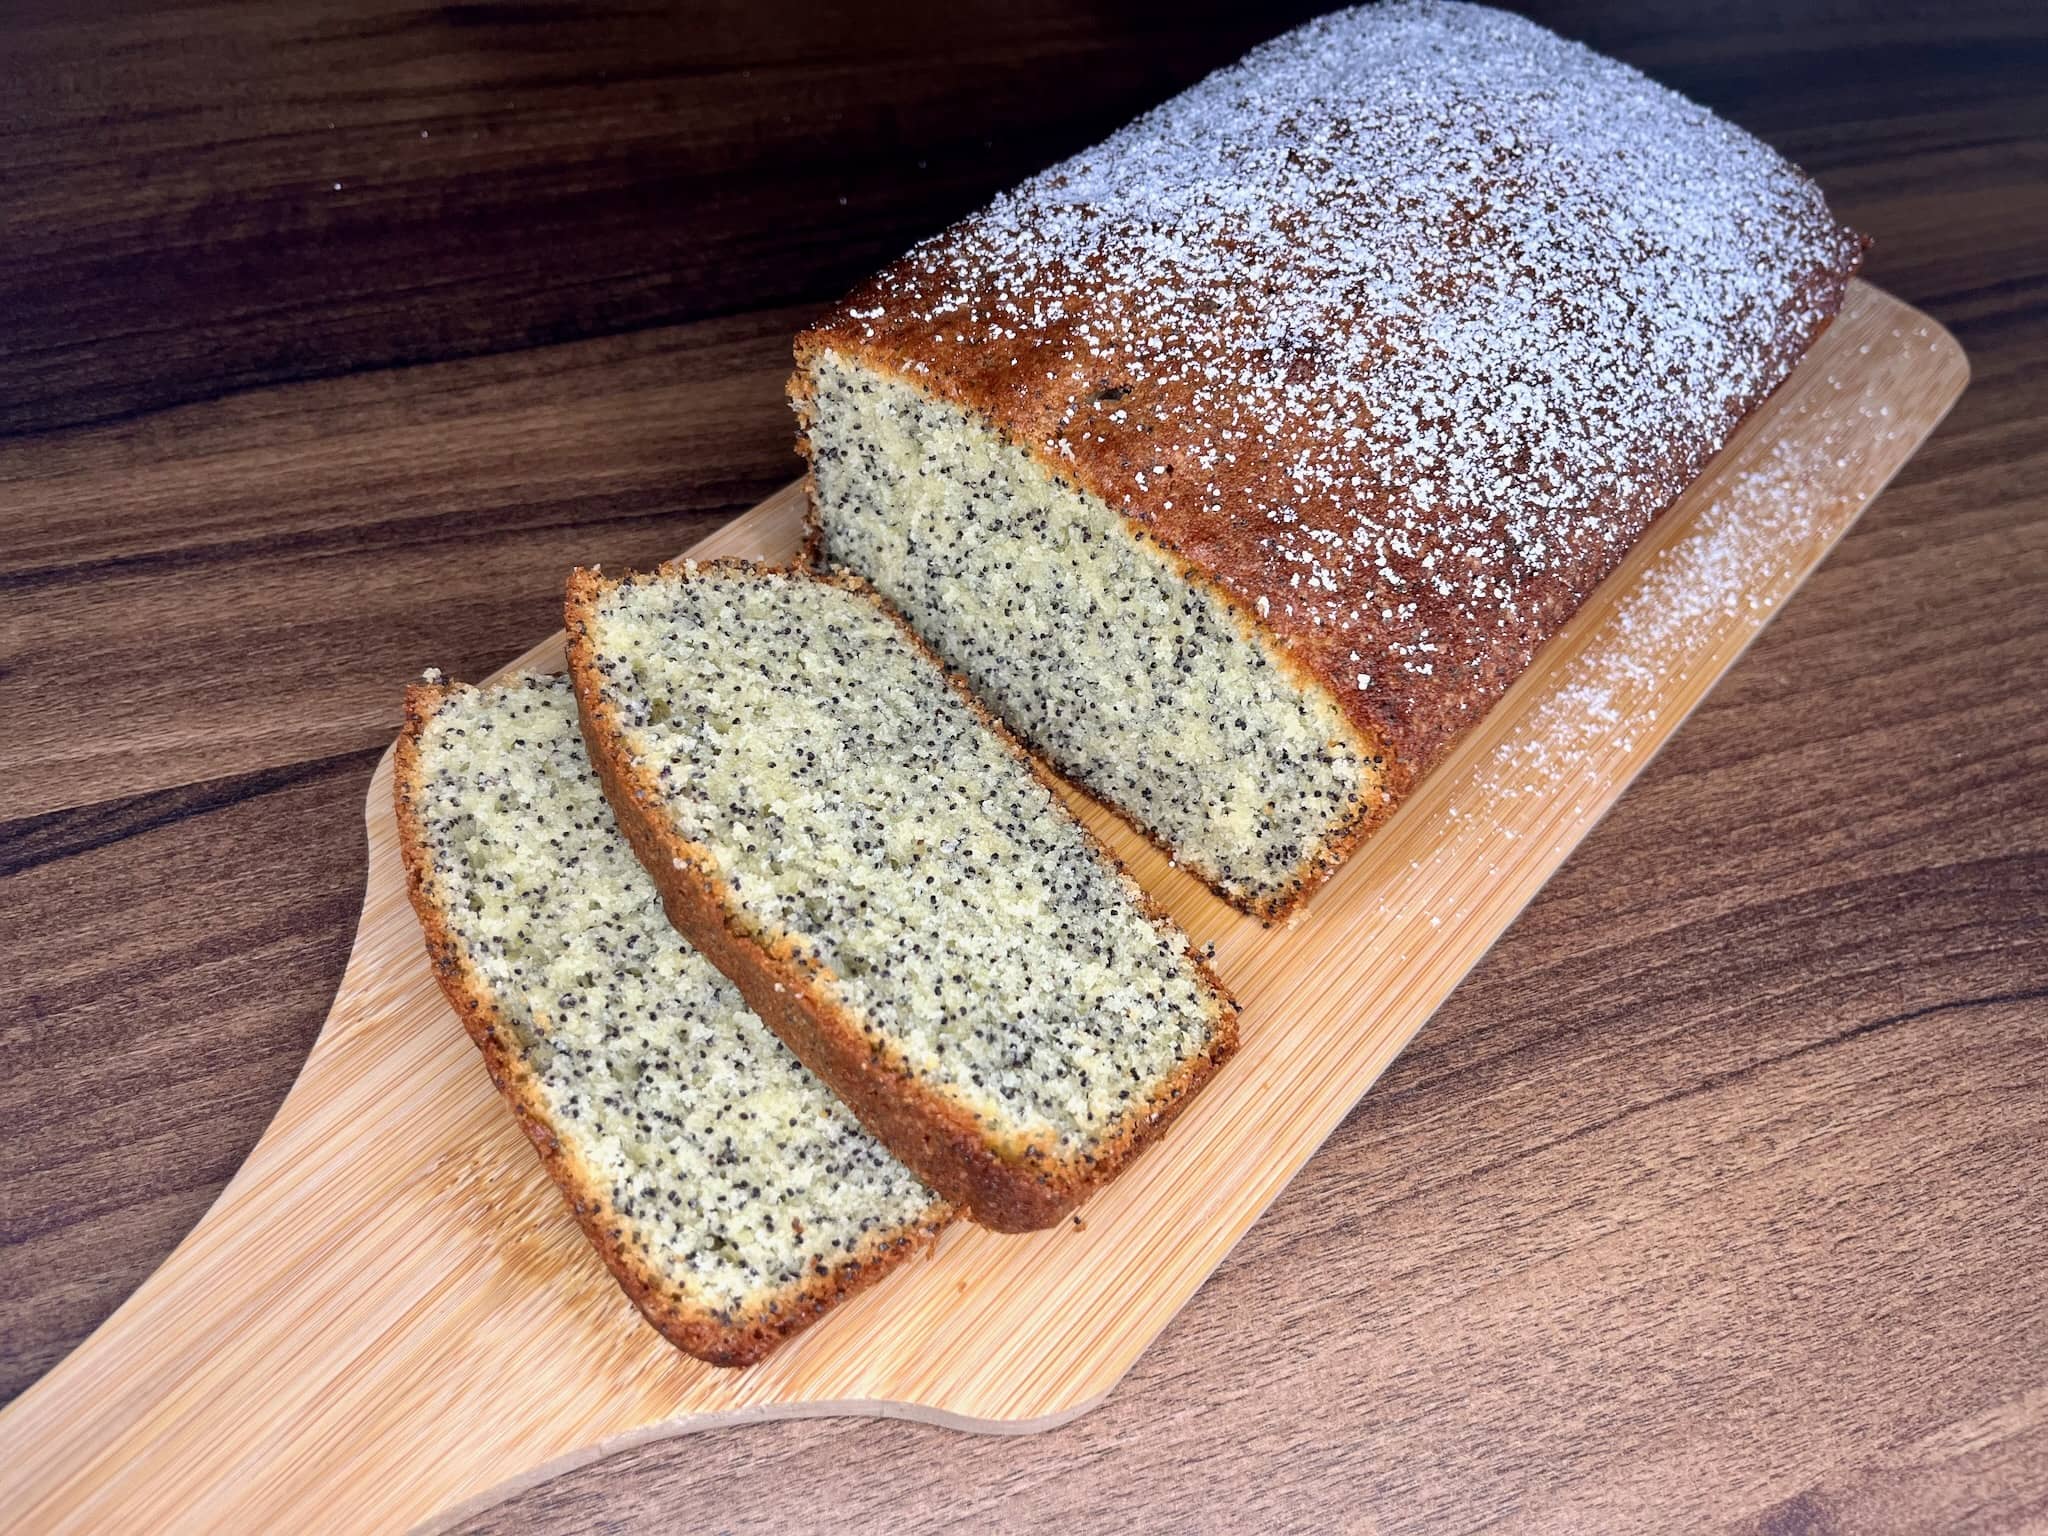 Slices of poppy seed loaf cake on a cutting board